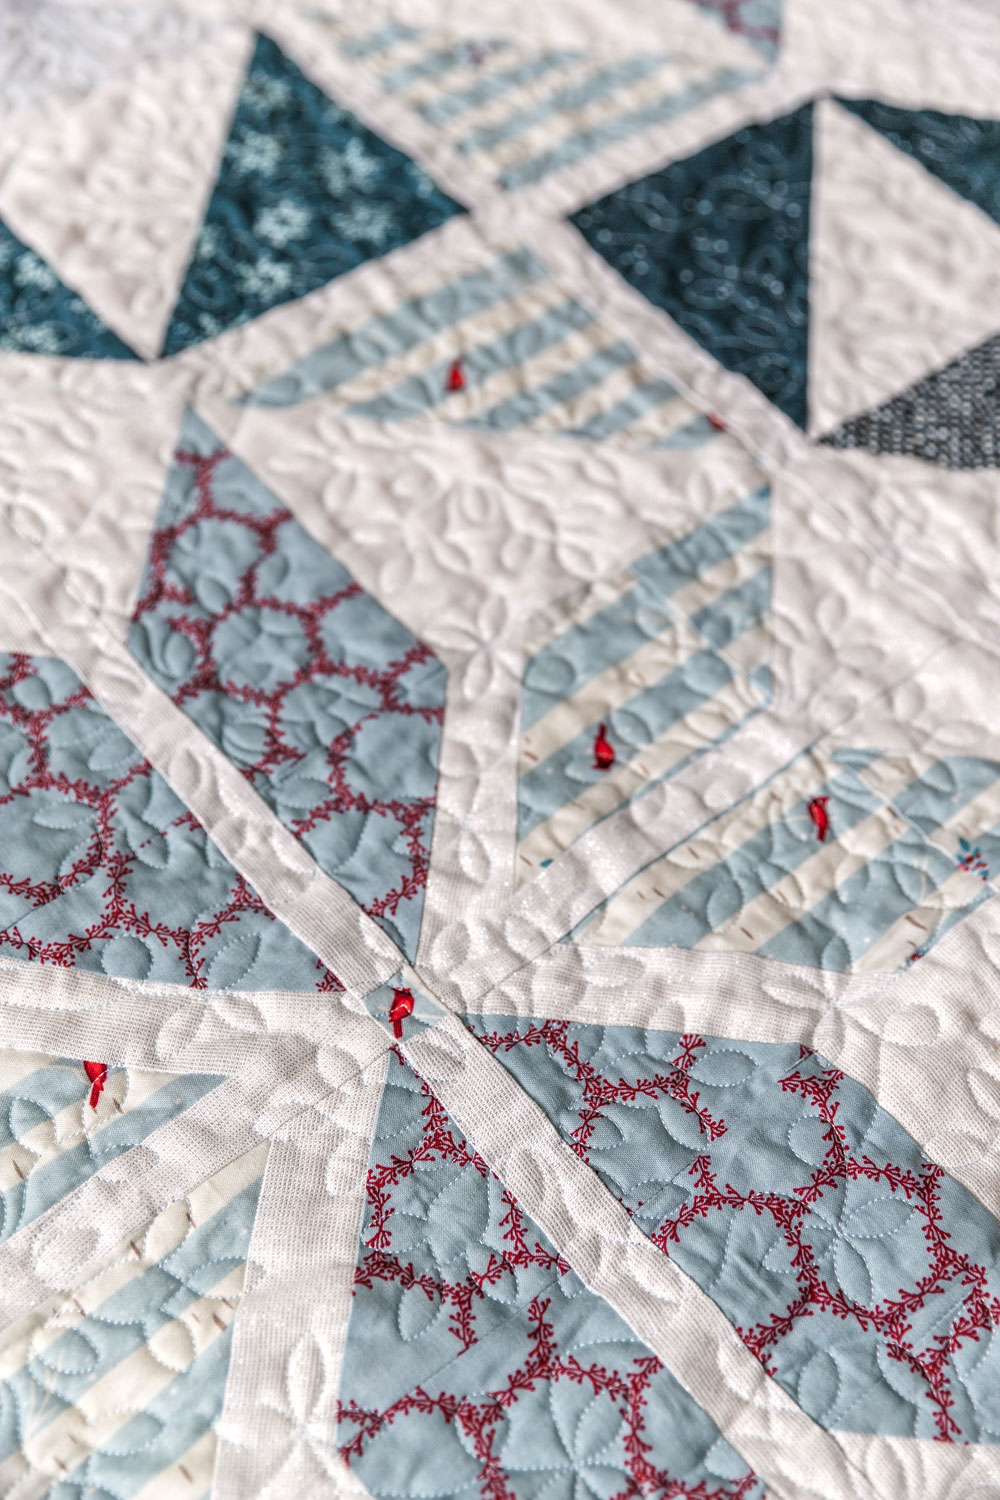 Holiday Party is a fat quarter friendly Christmas quilt pattern that includes a video tutorial and lots of different sizes and color variations! suzyquilts.com #christmasquilt #quiltpattern 